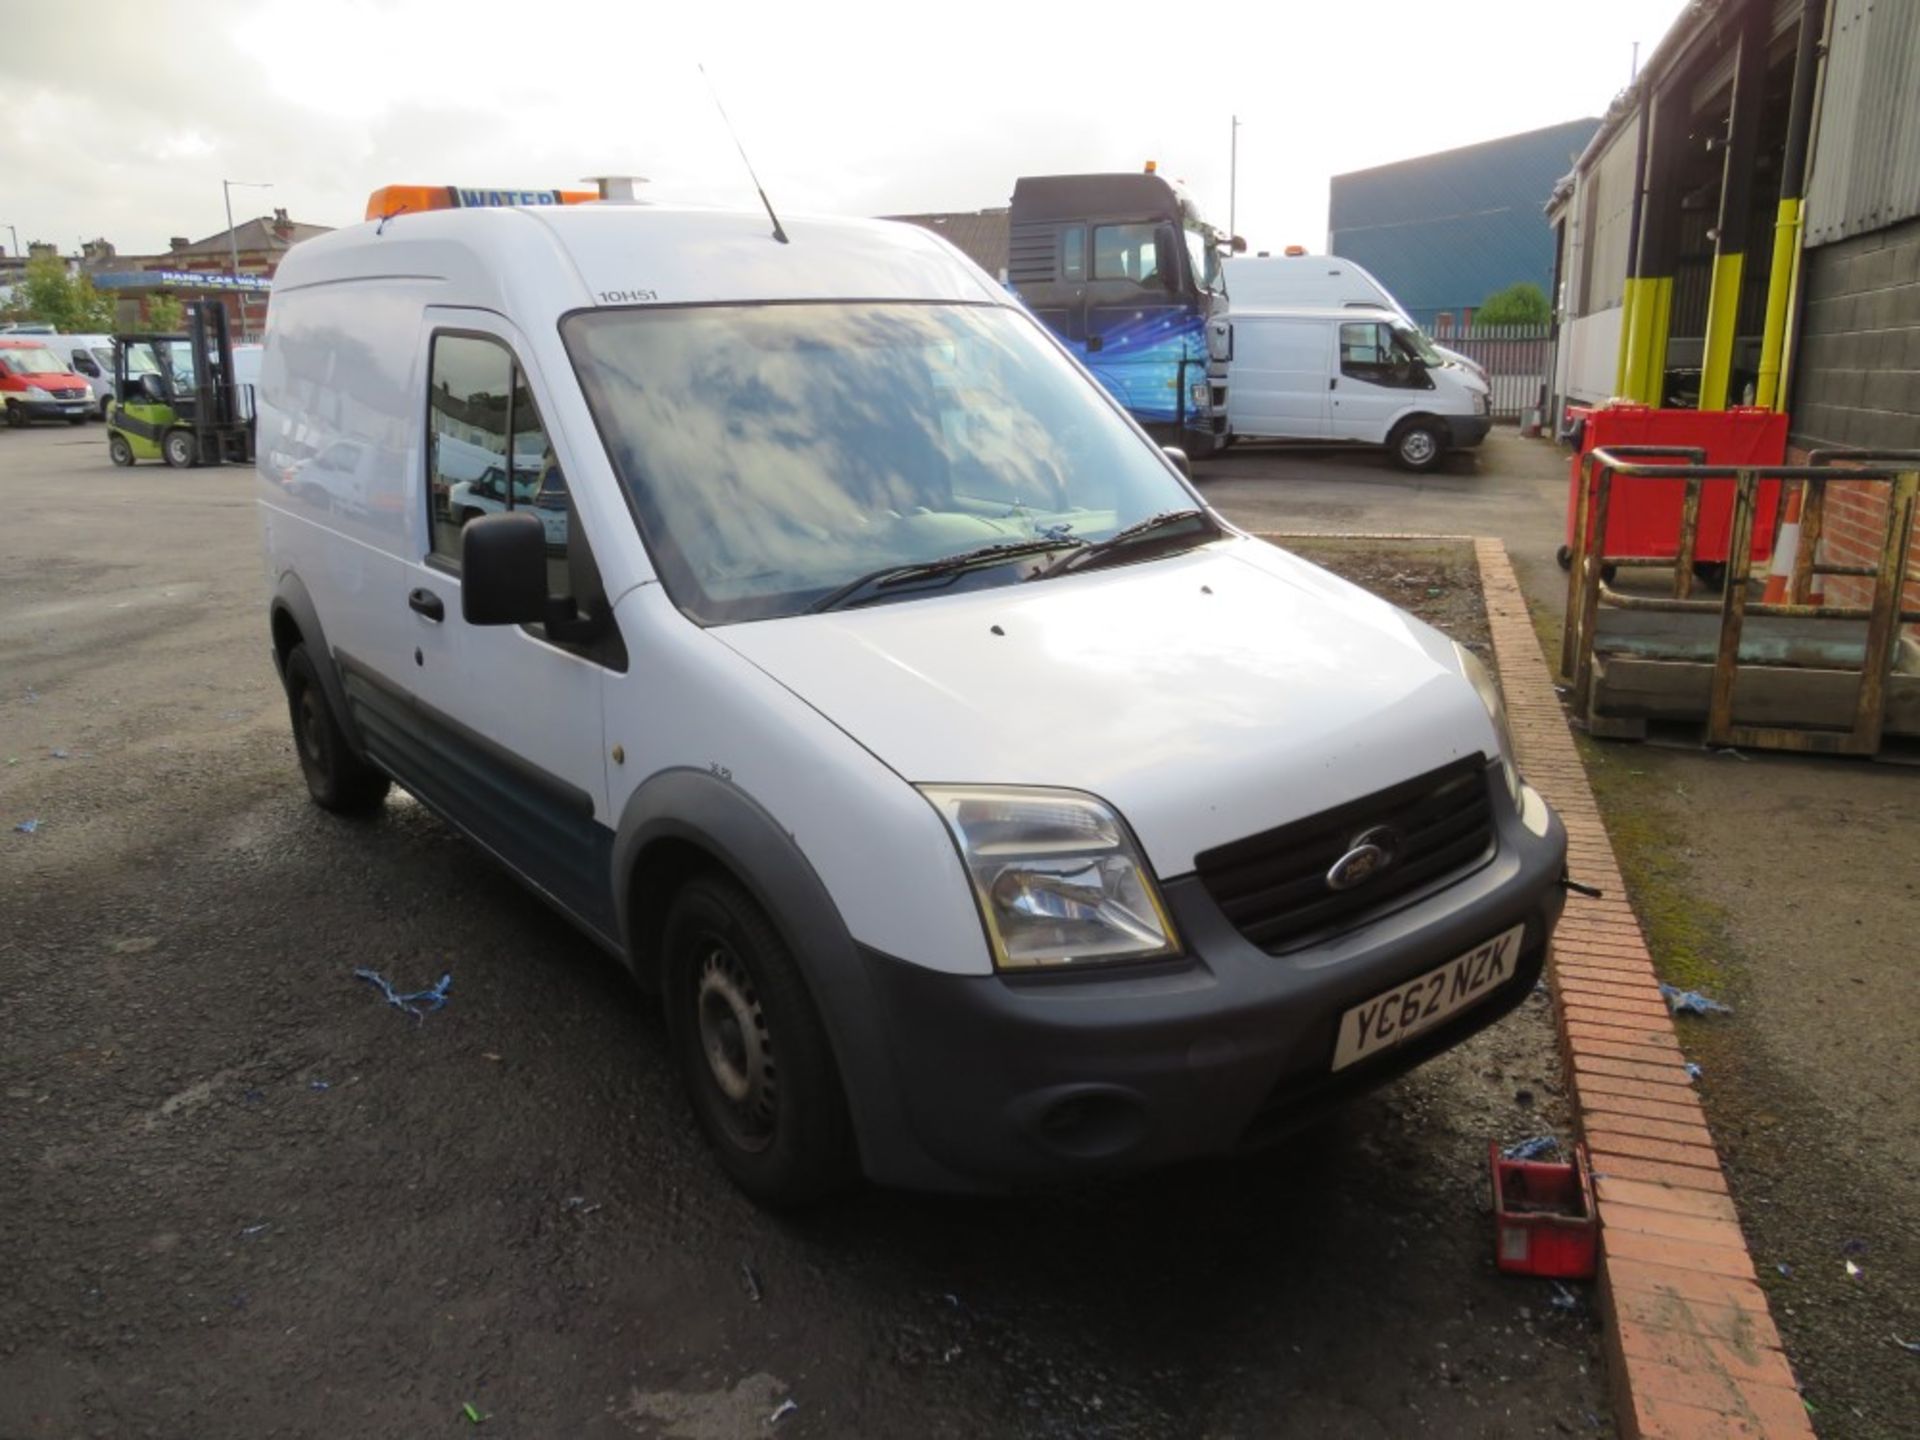 62 reg FORD TRANSIT CONNECT 90 T230 (DIRECT UNITED UTILITIES WATER) 1ST REG 10/12, TEST 06/21,